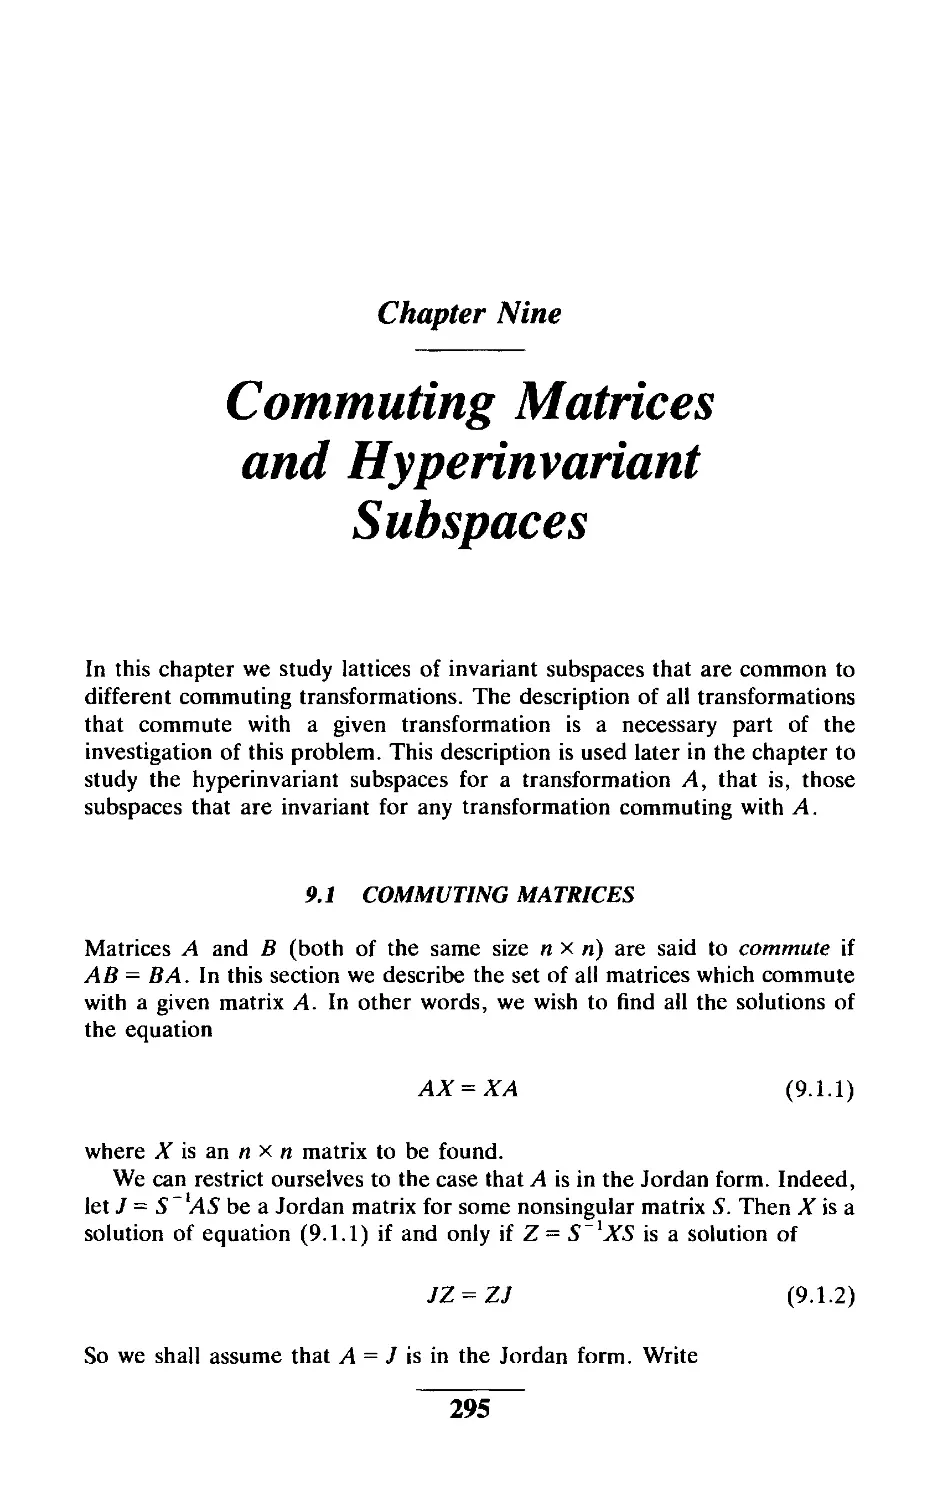 Chapter Nine Commuting Matrices and Hyperinvariant Subspaces